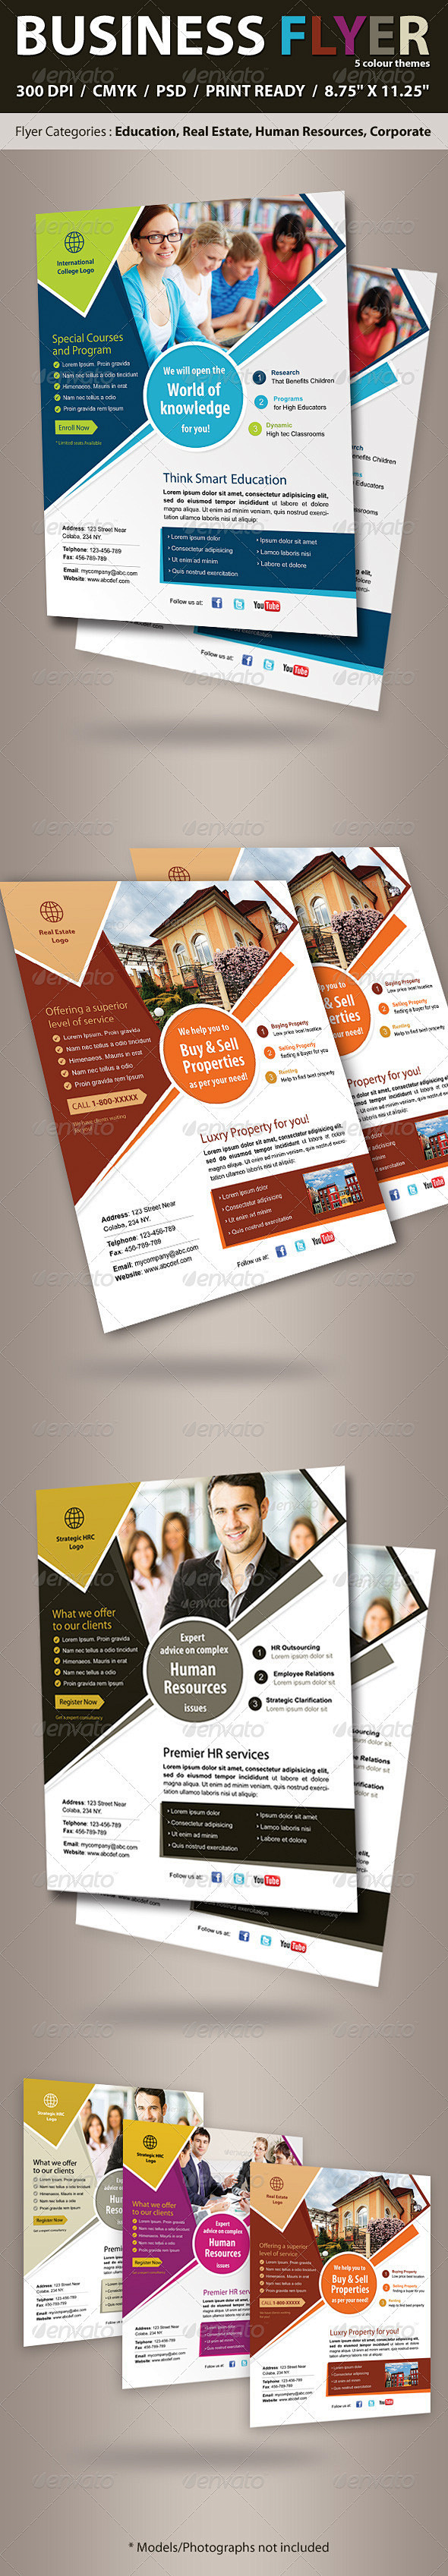 Business Flyer (Real...